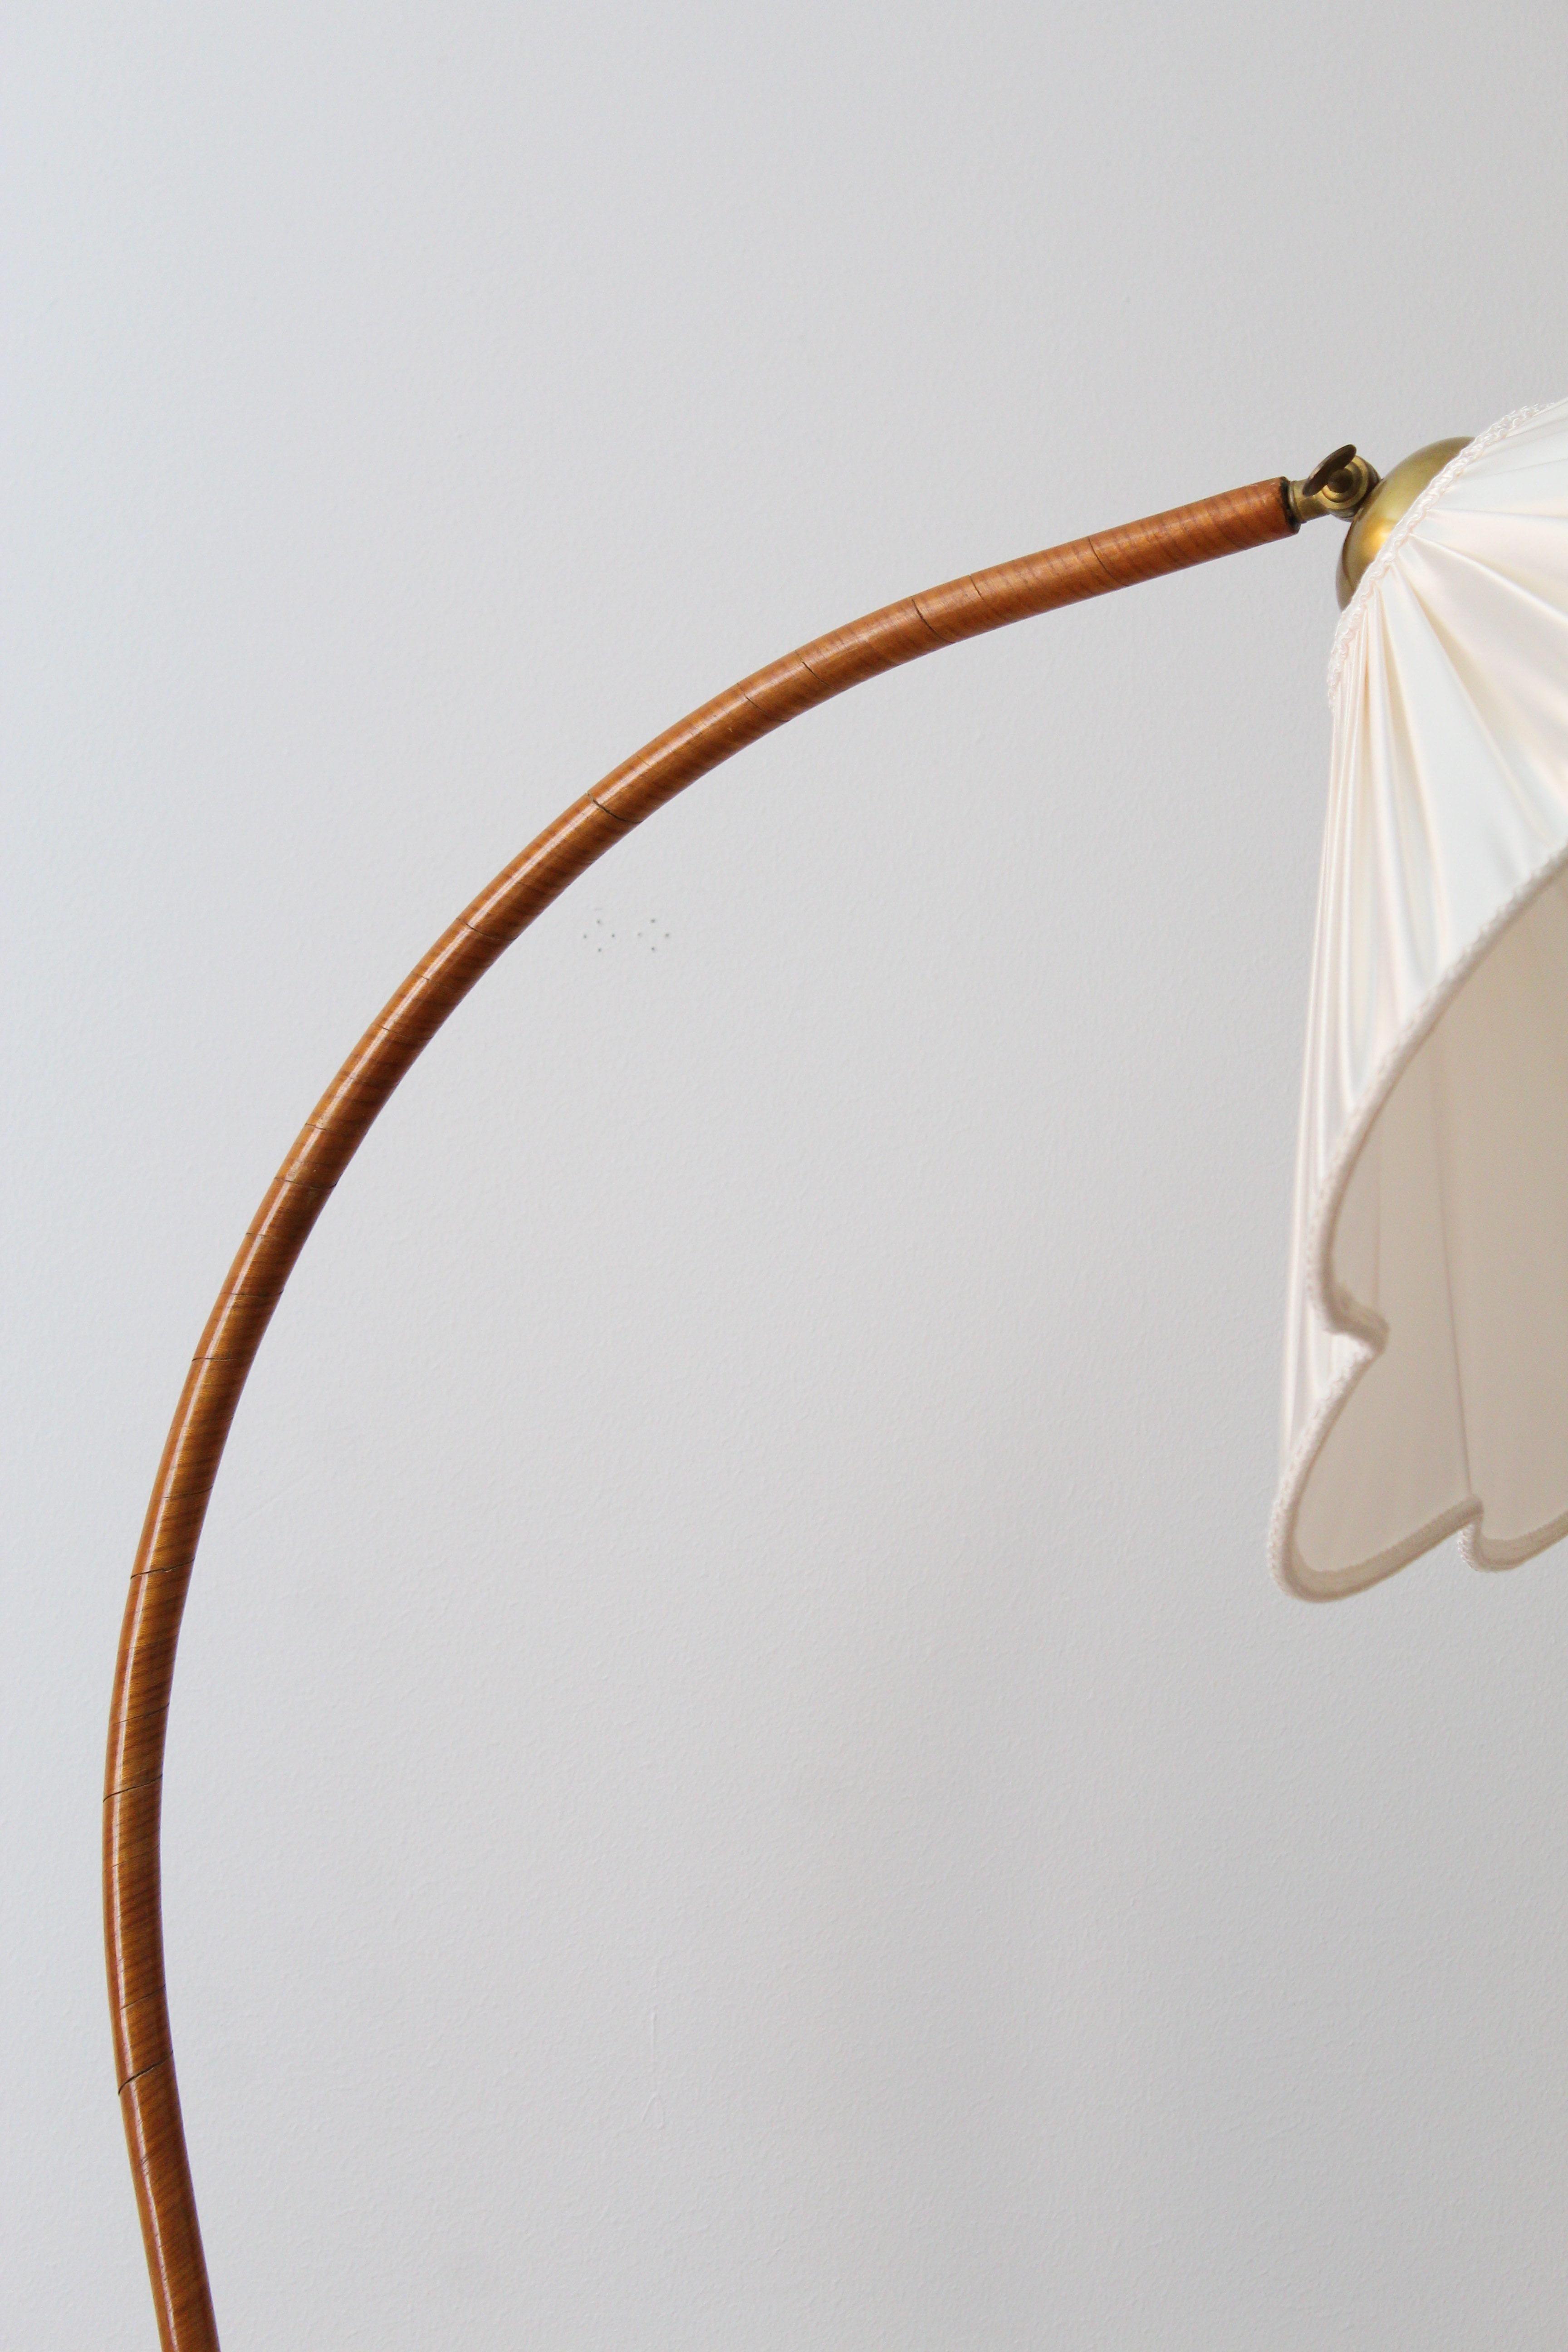 An organic floor lamp. Designed by an unknown Swedish modernist designer, 1930s. Produced in wood, fabric, and brass. 

Other designers working in the organic style include Jean Royère, Gio Ponti, Vladimir Kagan, Ico Parisi, and George Nakashima.